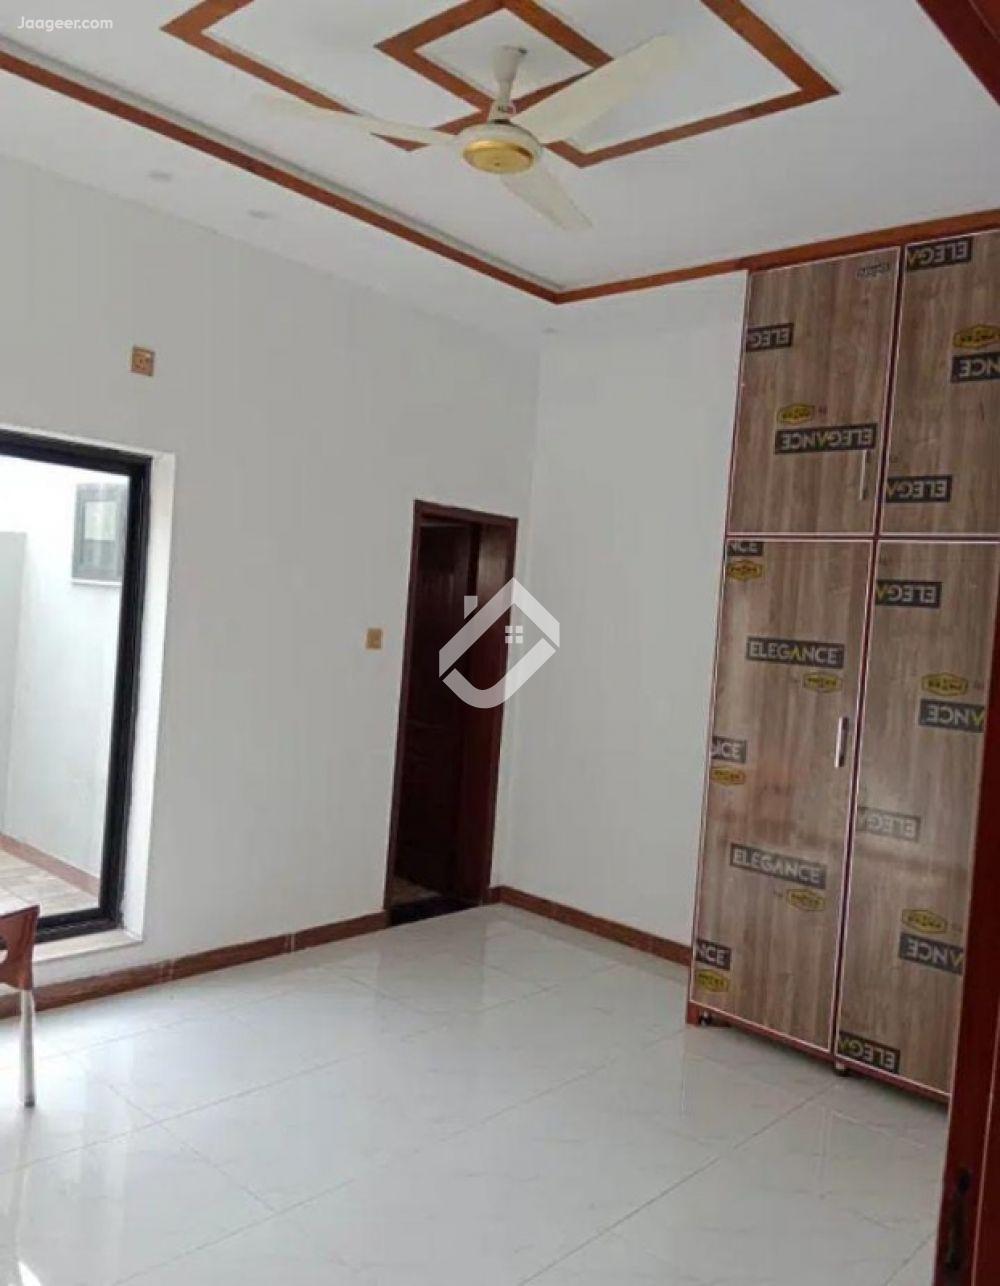 View  7 Marla Double Storey House For Sale In Lahore Motorway City  in Lahore Motorway City, Lahore